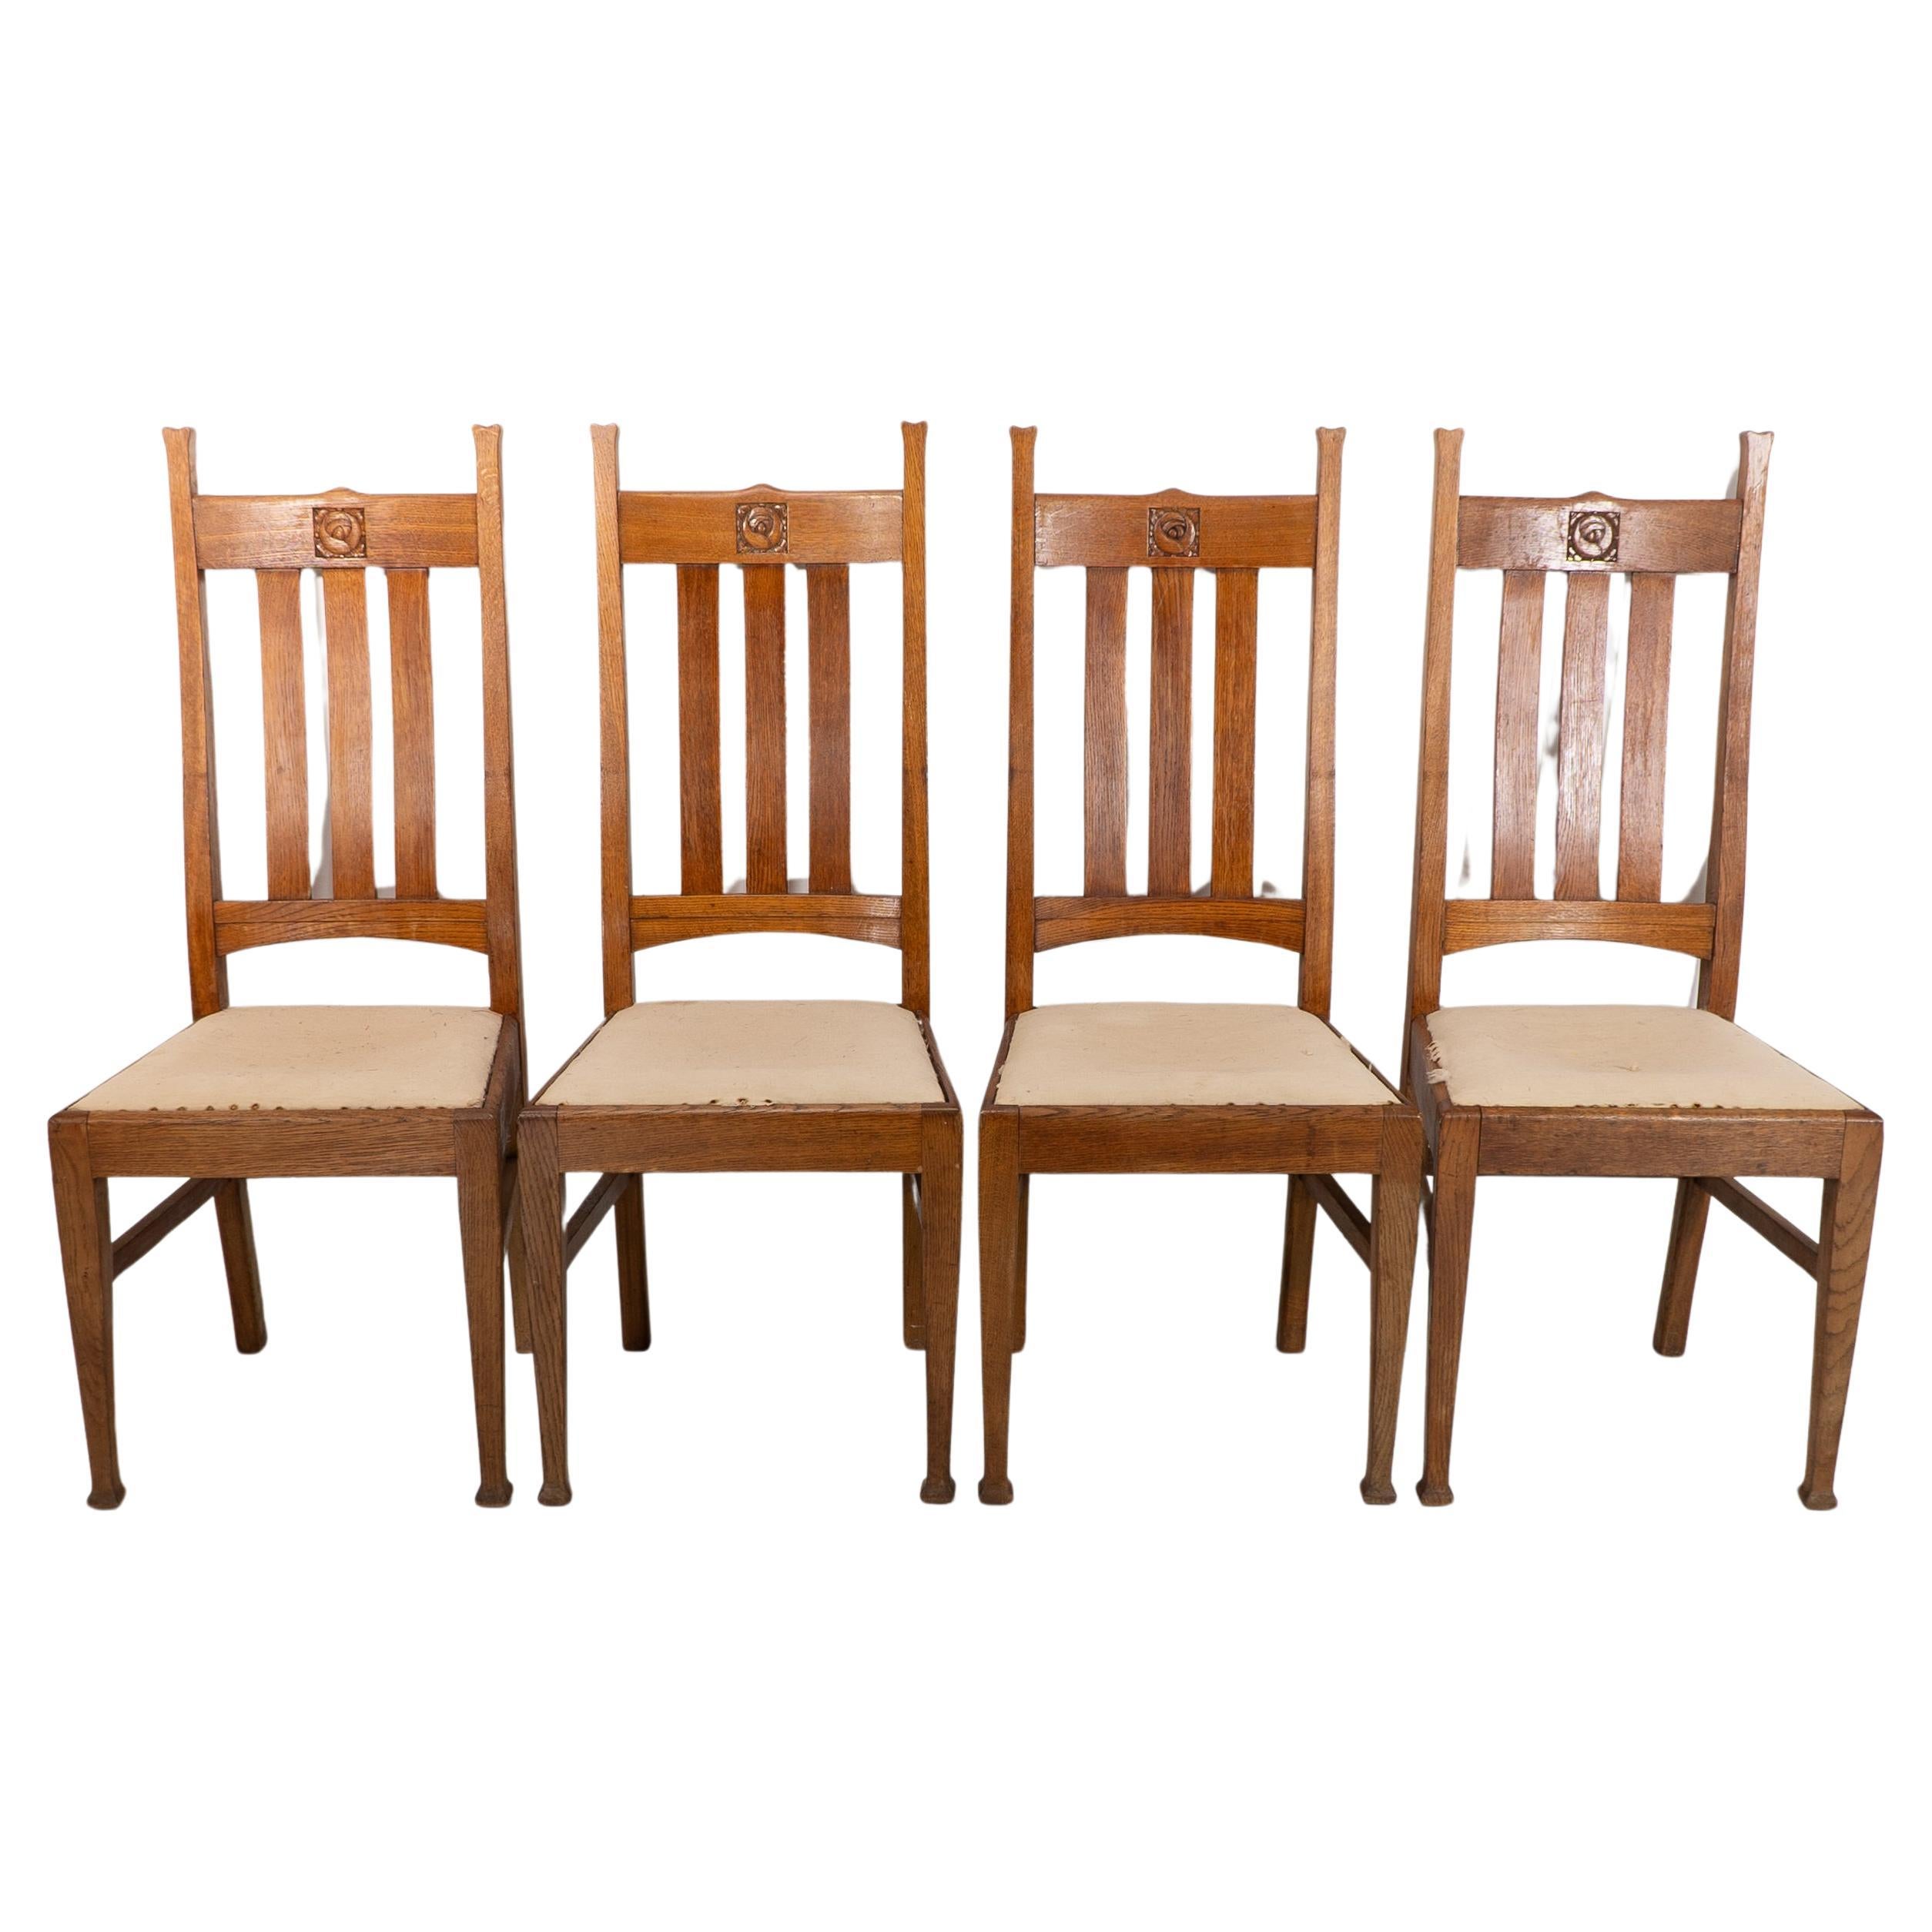 E A Taylor for Wylie & Lochhead. A set of four Arts and Crafts oak dining chairs For Sale